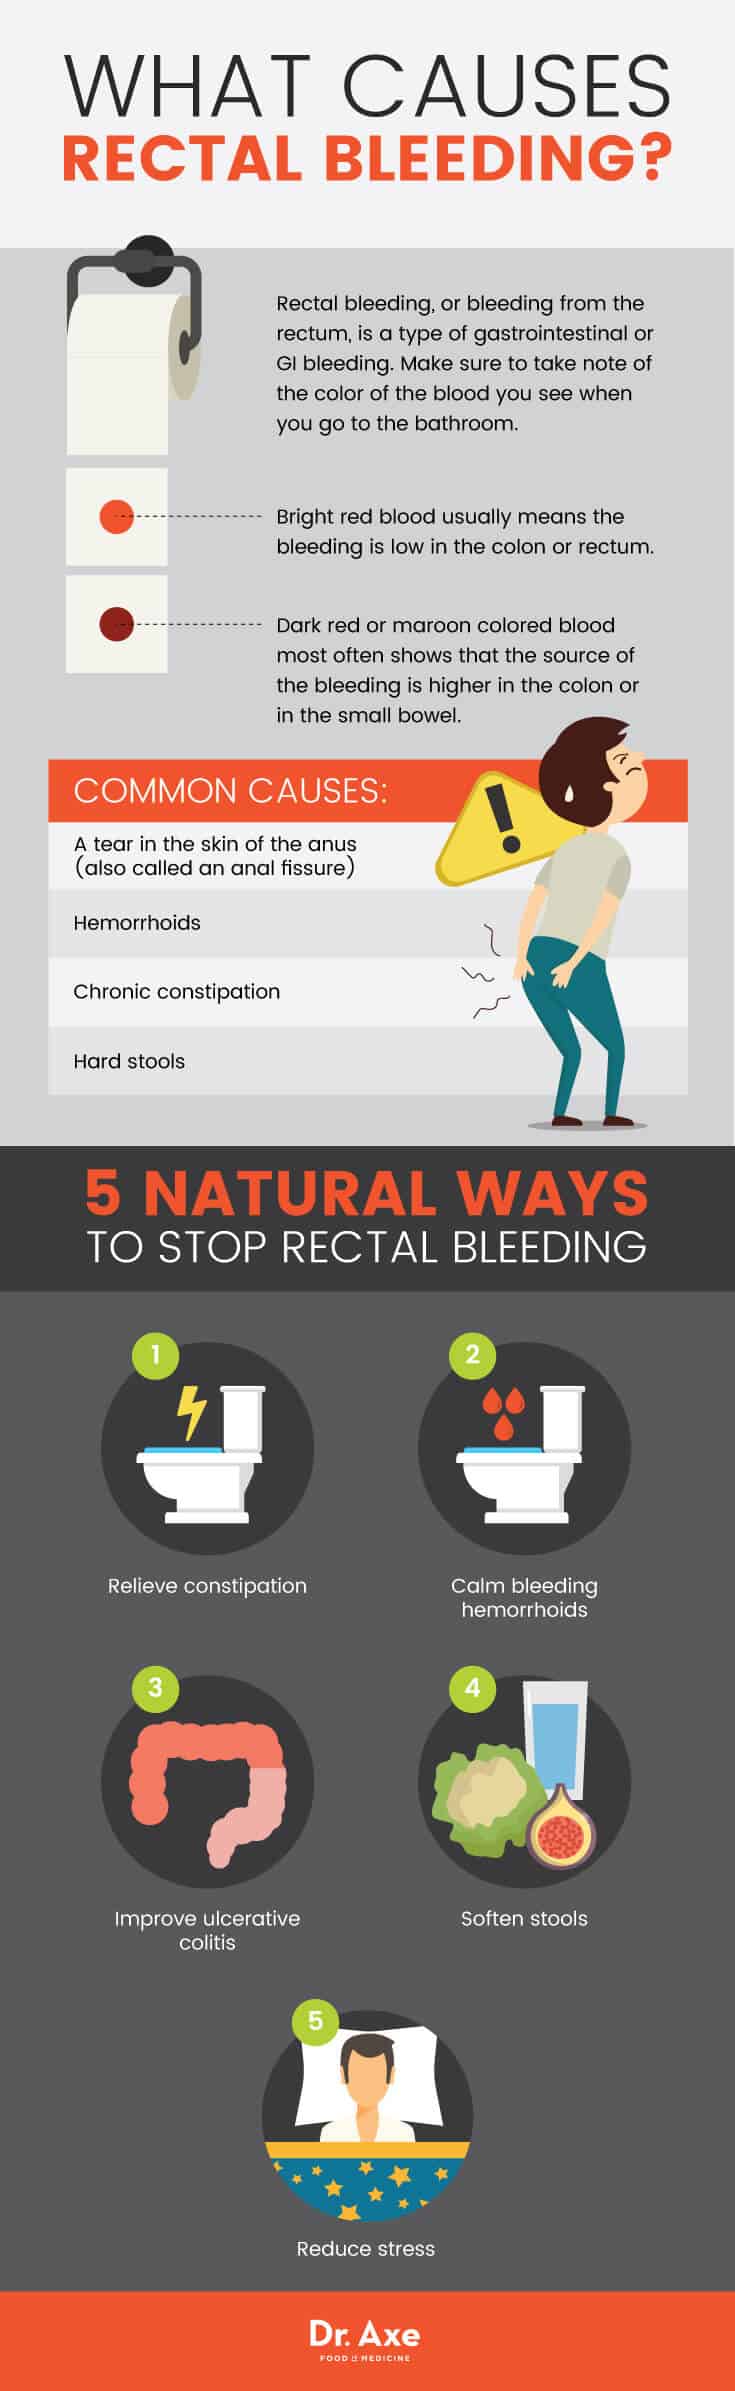 What causes rectal bleeding? - Dr. Axe